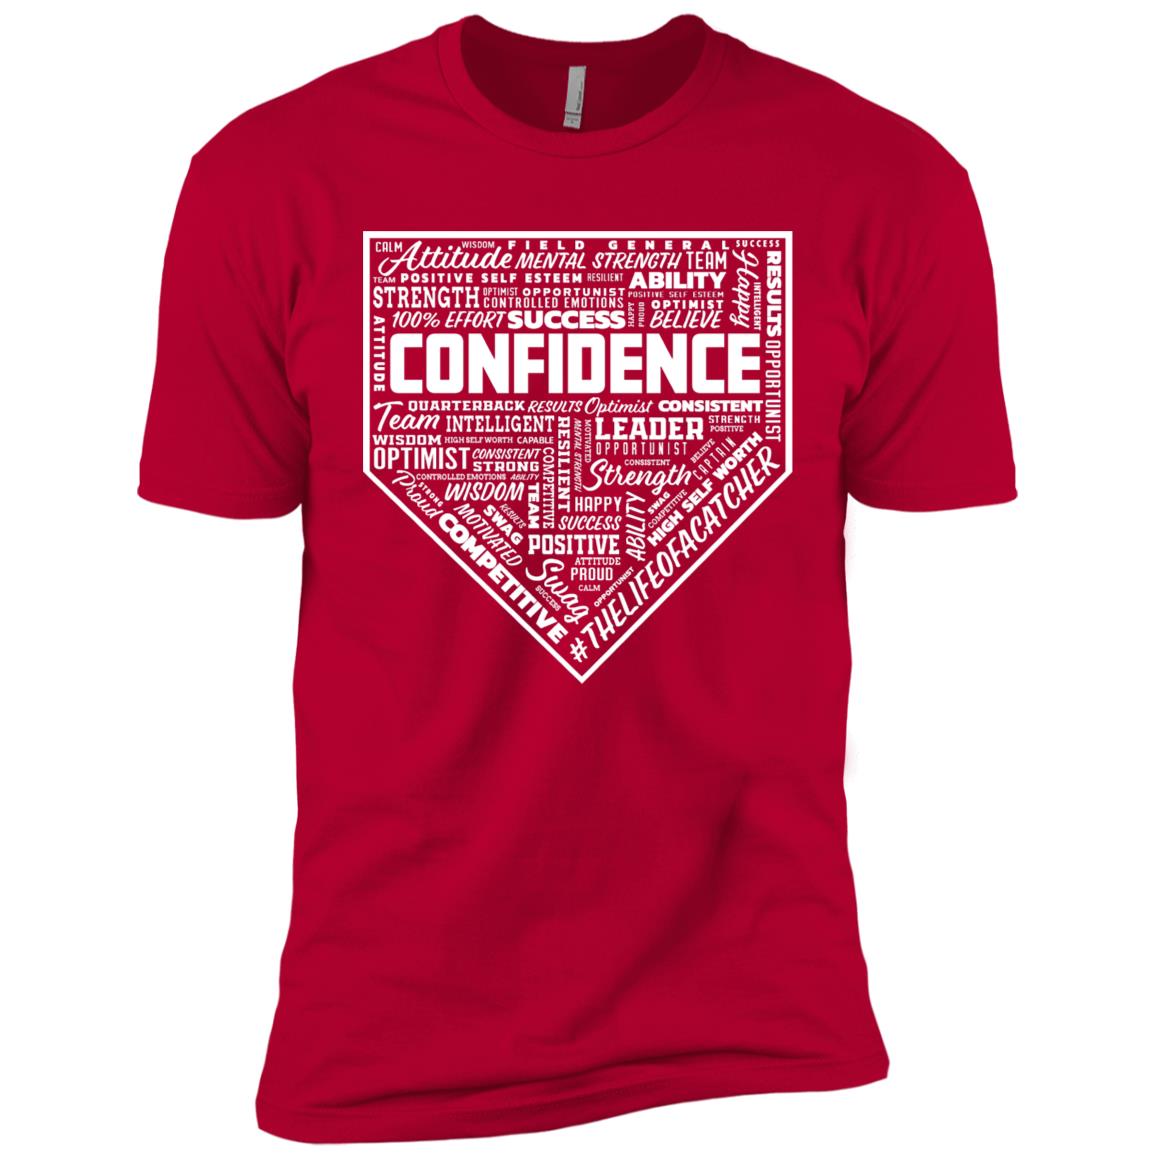 The Catching Guy Catcher Confidence Youth Tee in red